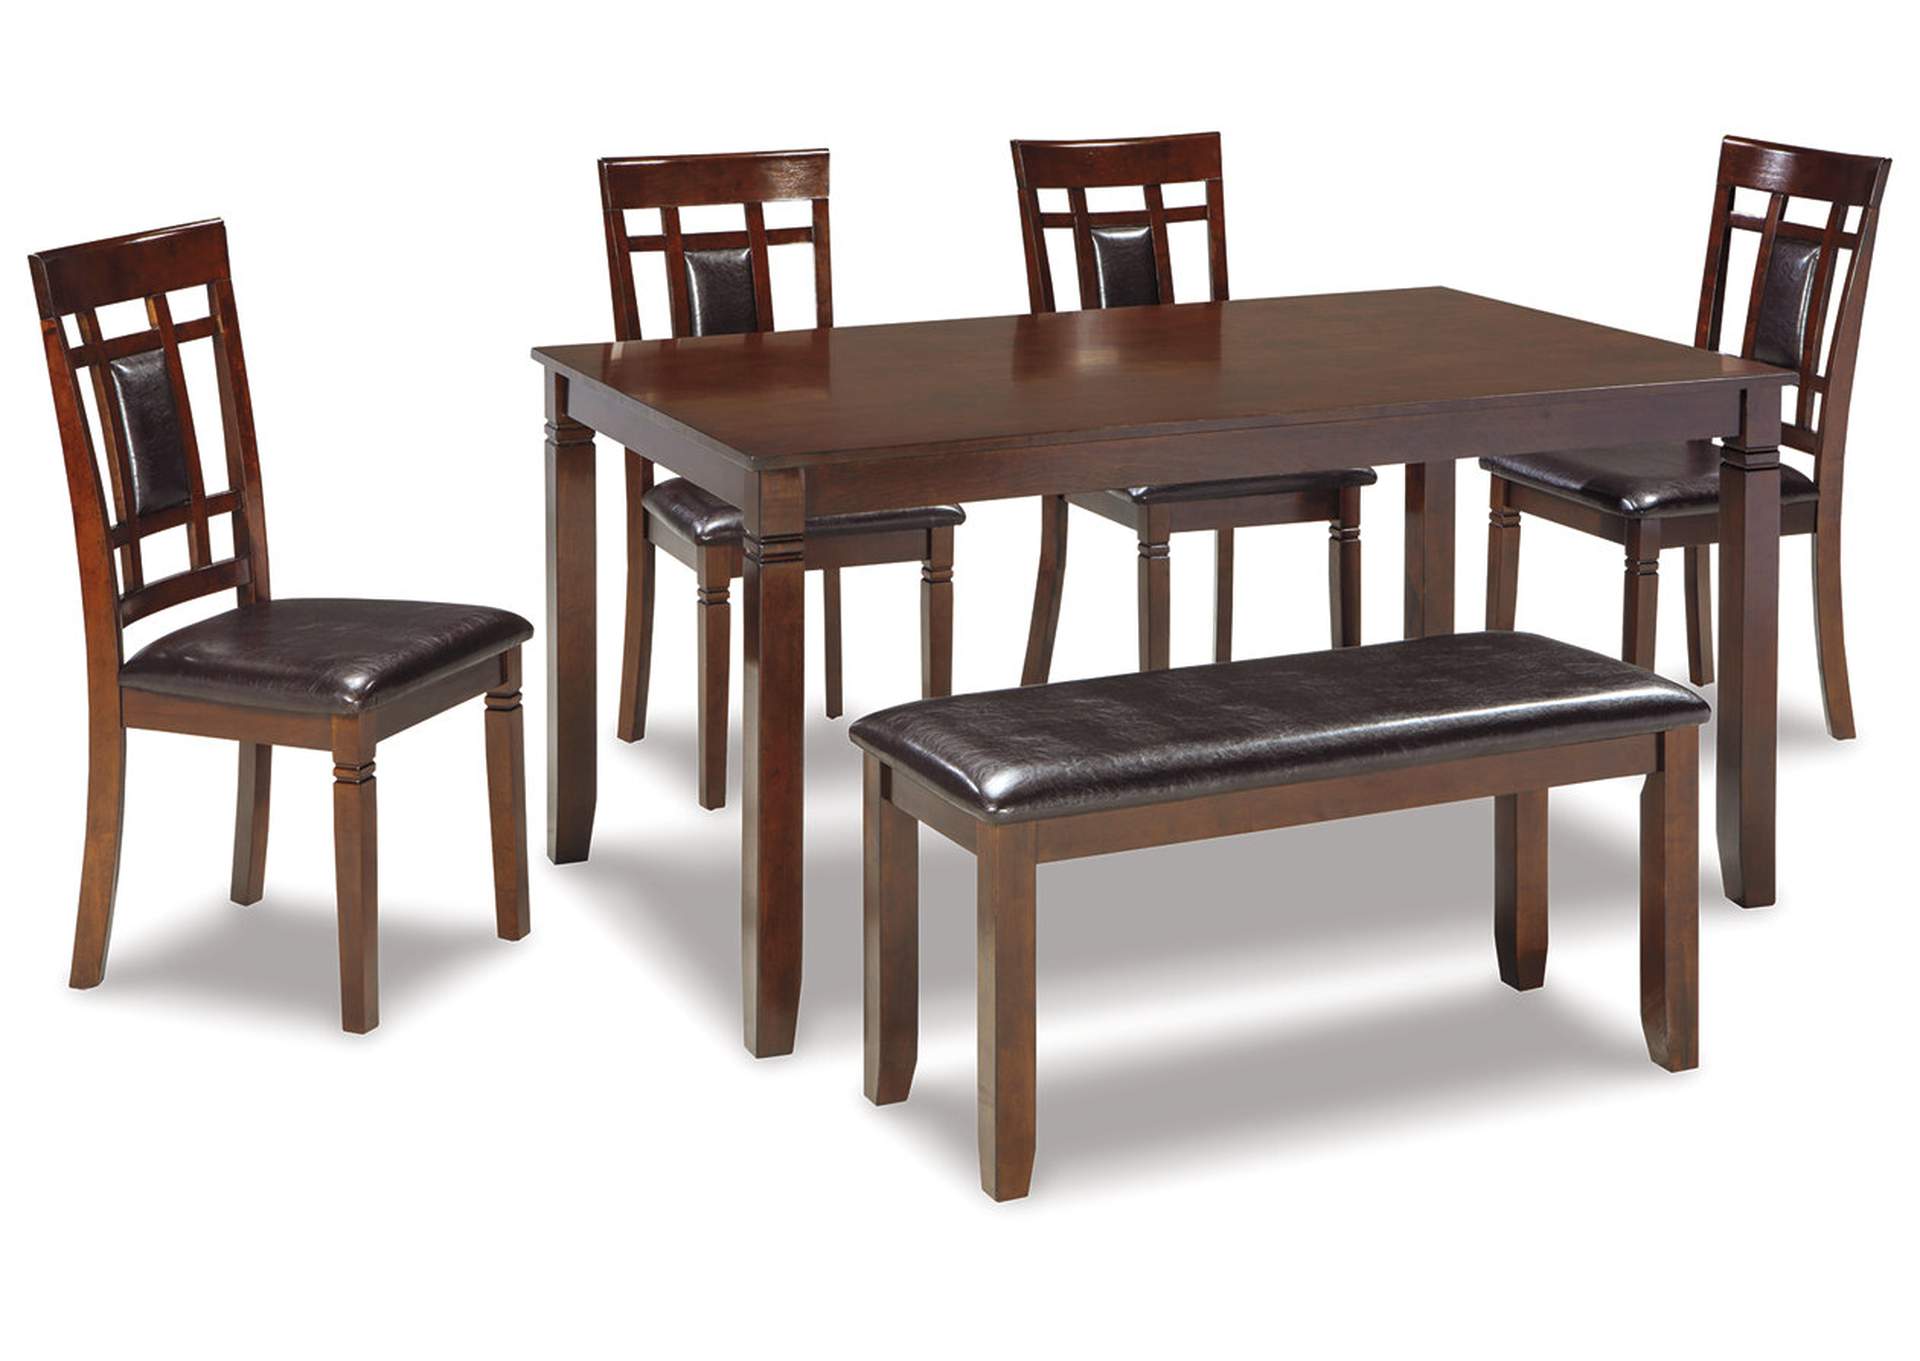 Dining Room Table With Chairs / Buy Dining Room Furniture At Best